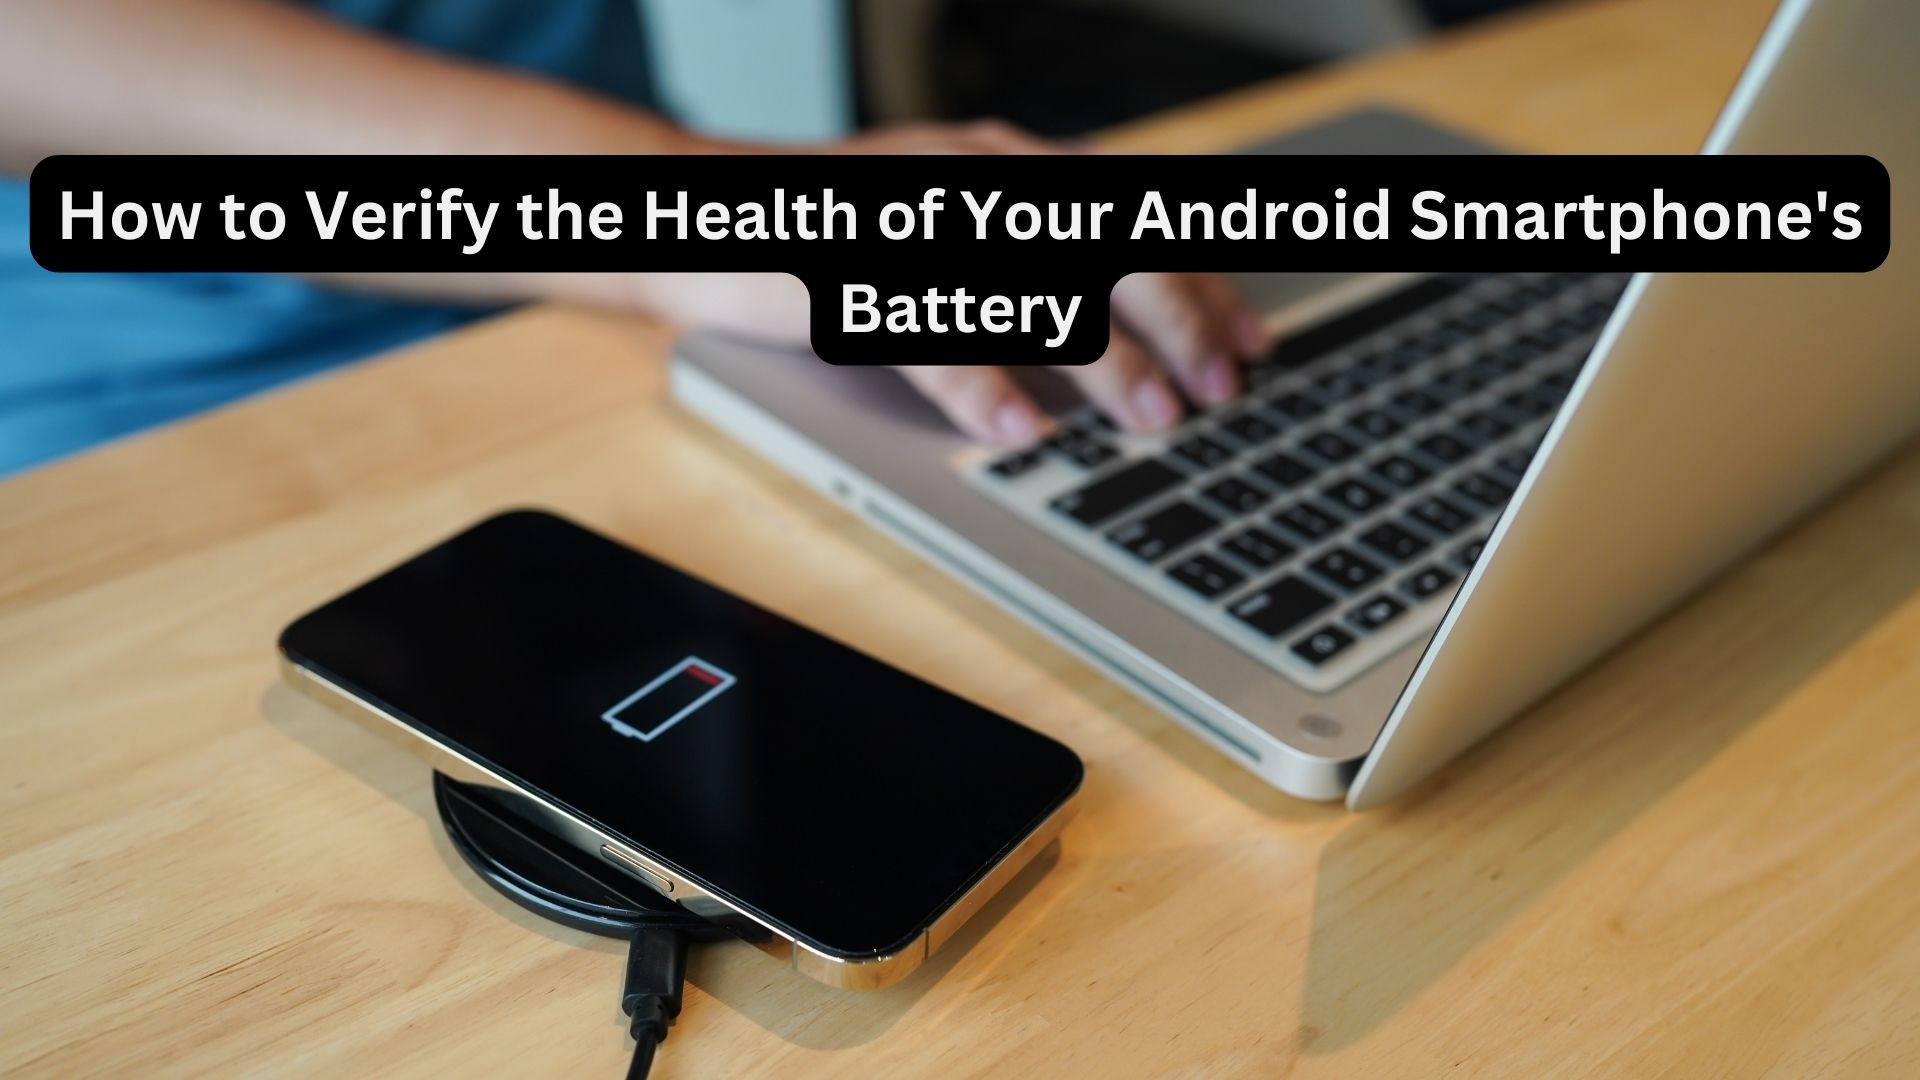 How to Verify the Health of Your Android Smartphone's Battery